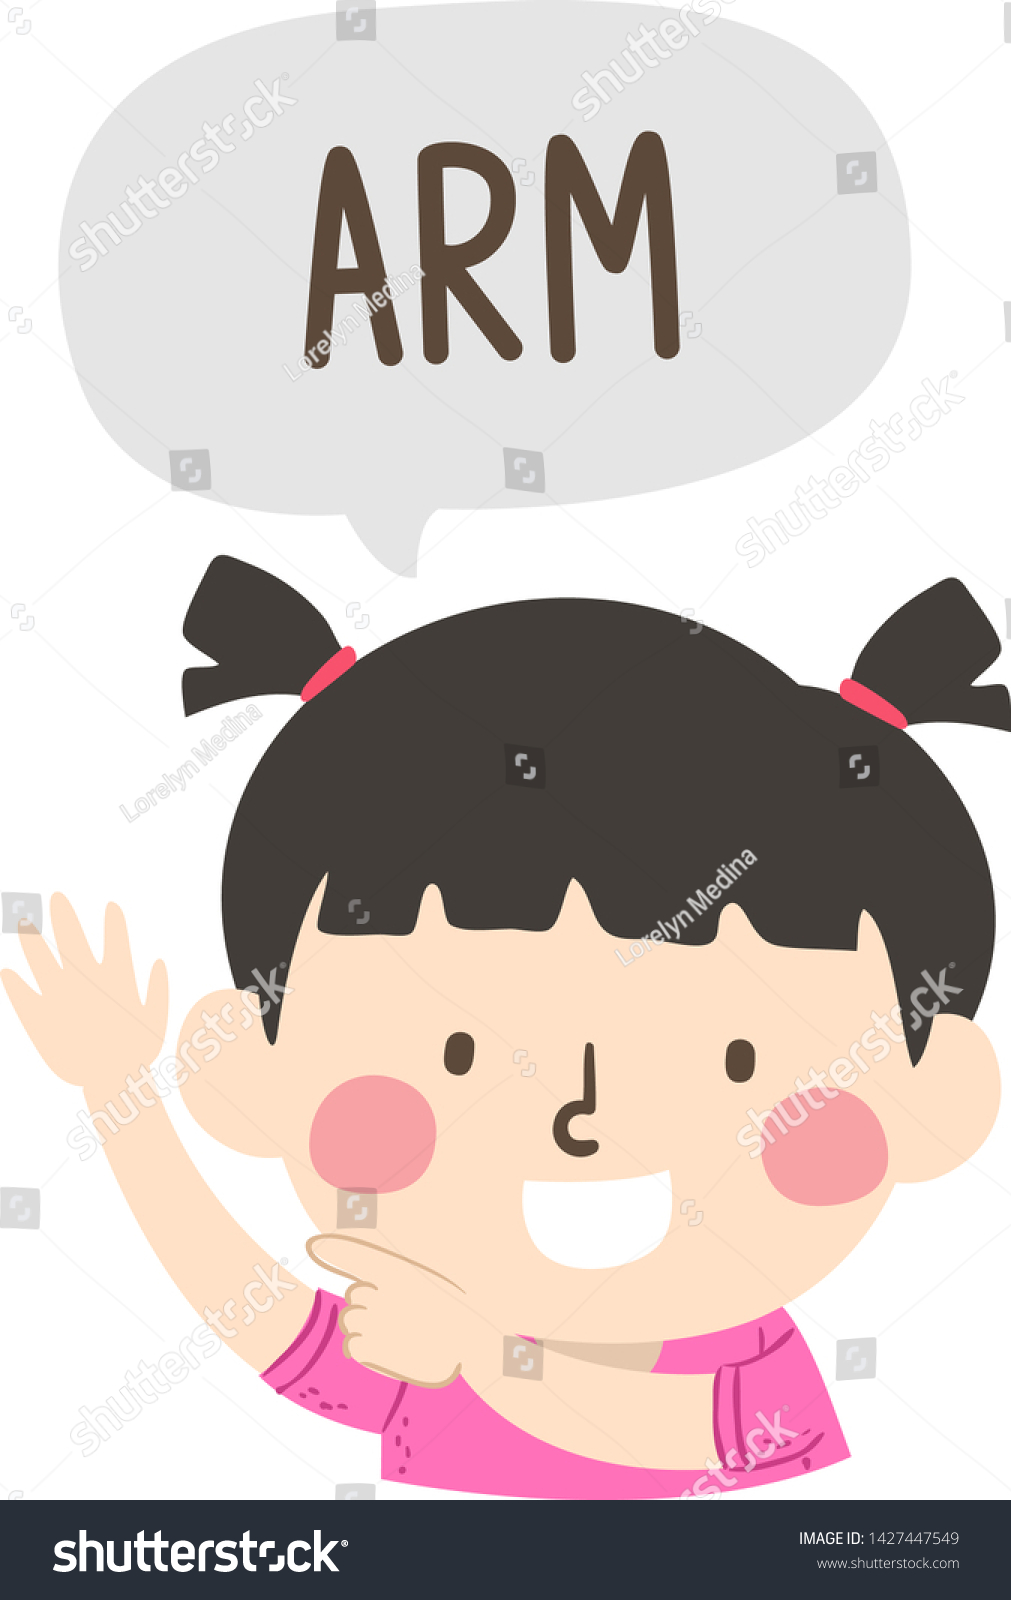 Illustration Kid Girl Pointing Saying Arm Stock Vector Royalty Free 1427447549 Download in under 30 seconds. https www shutterstock com image vector illustration kid girl pointing saying arm 1427447549